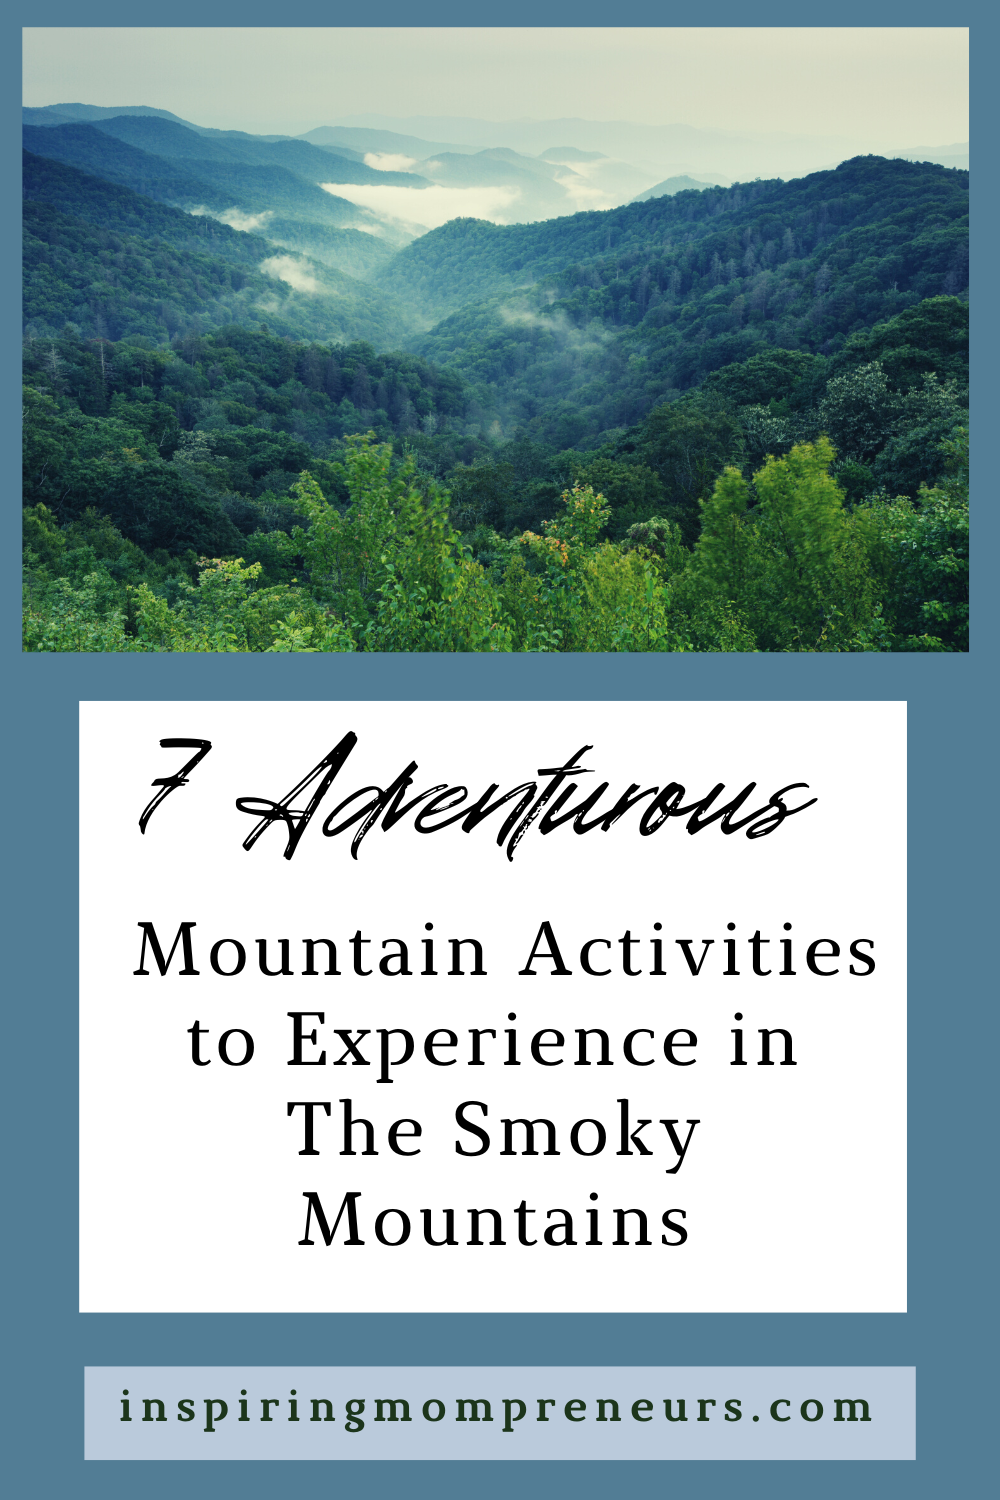 The Smoky Mountains have long been a magnet for adventure seekers from around the world. Here are 7 adventurous activities and experiences to enjoy when you go.